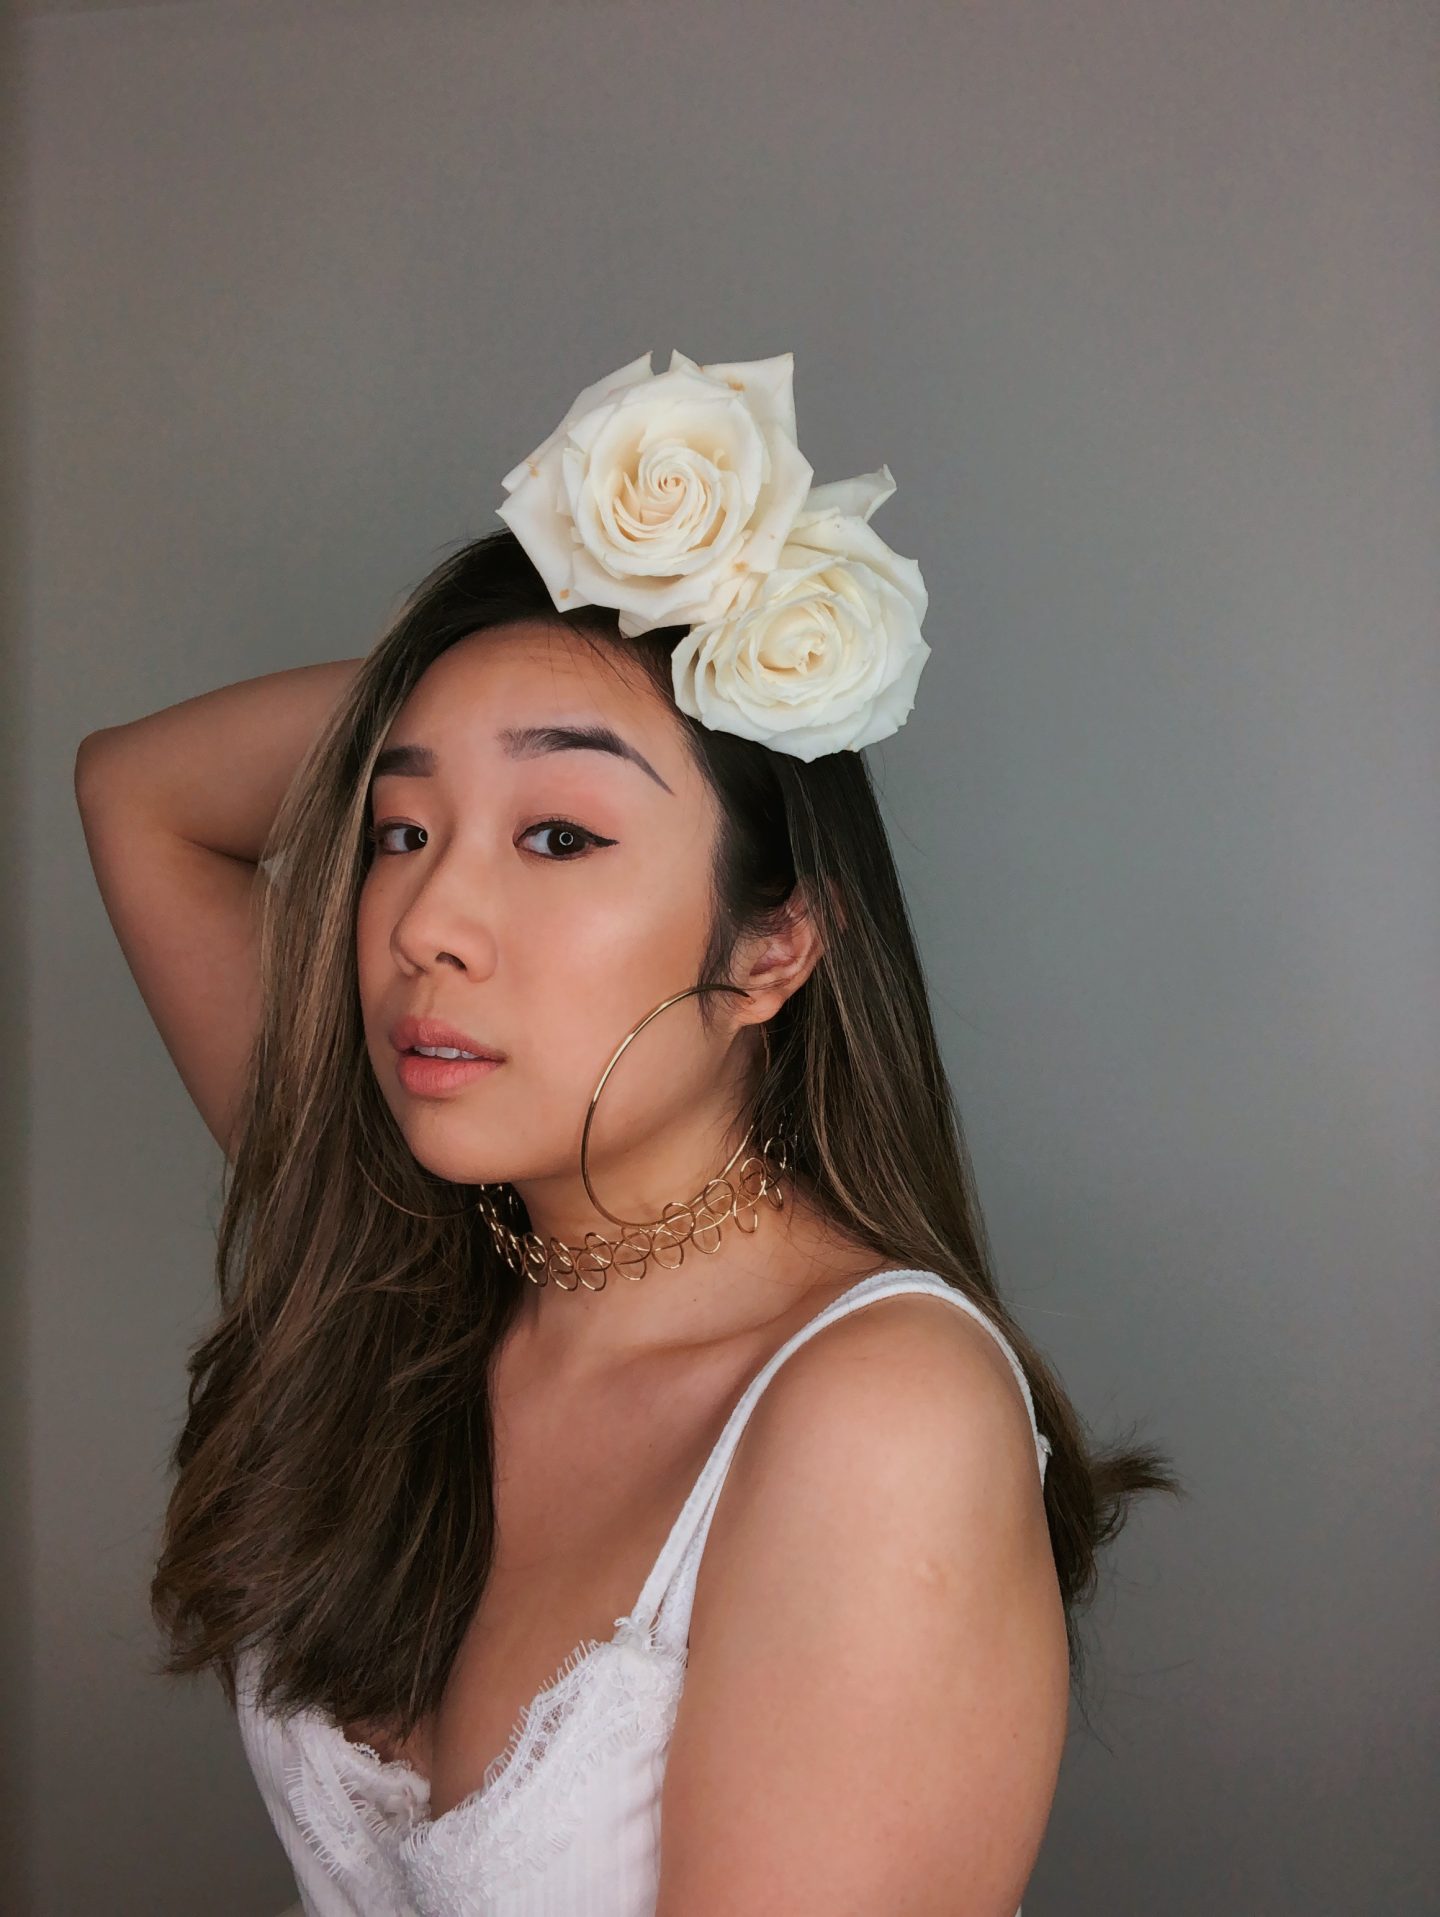 Floral headbands with big hoop earrings bringing the 90s vibes 